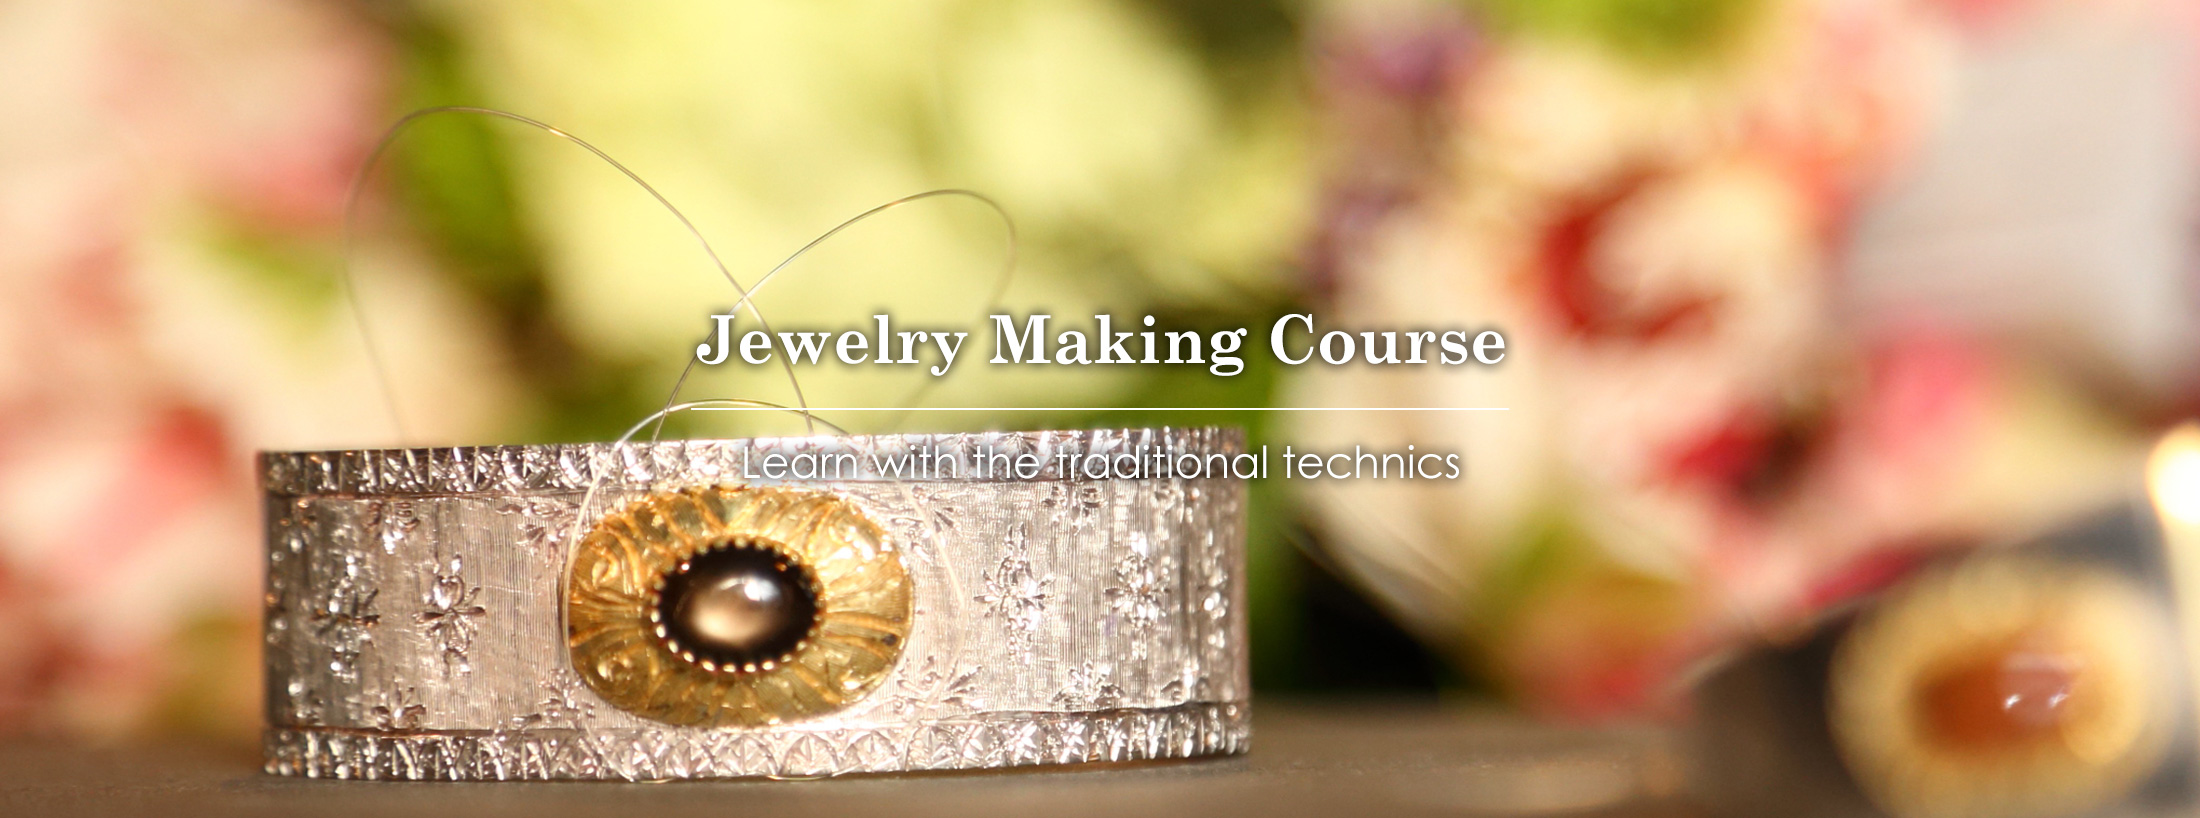 Jewelry Making Course